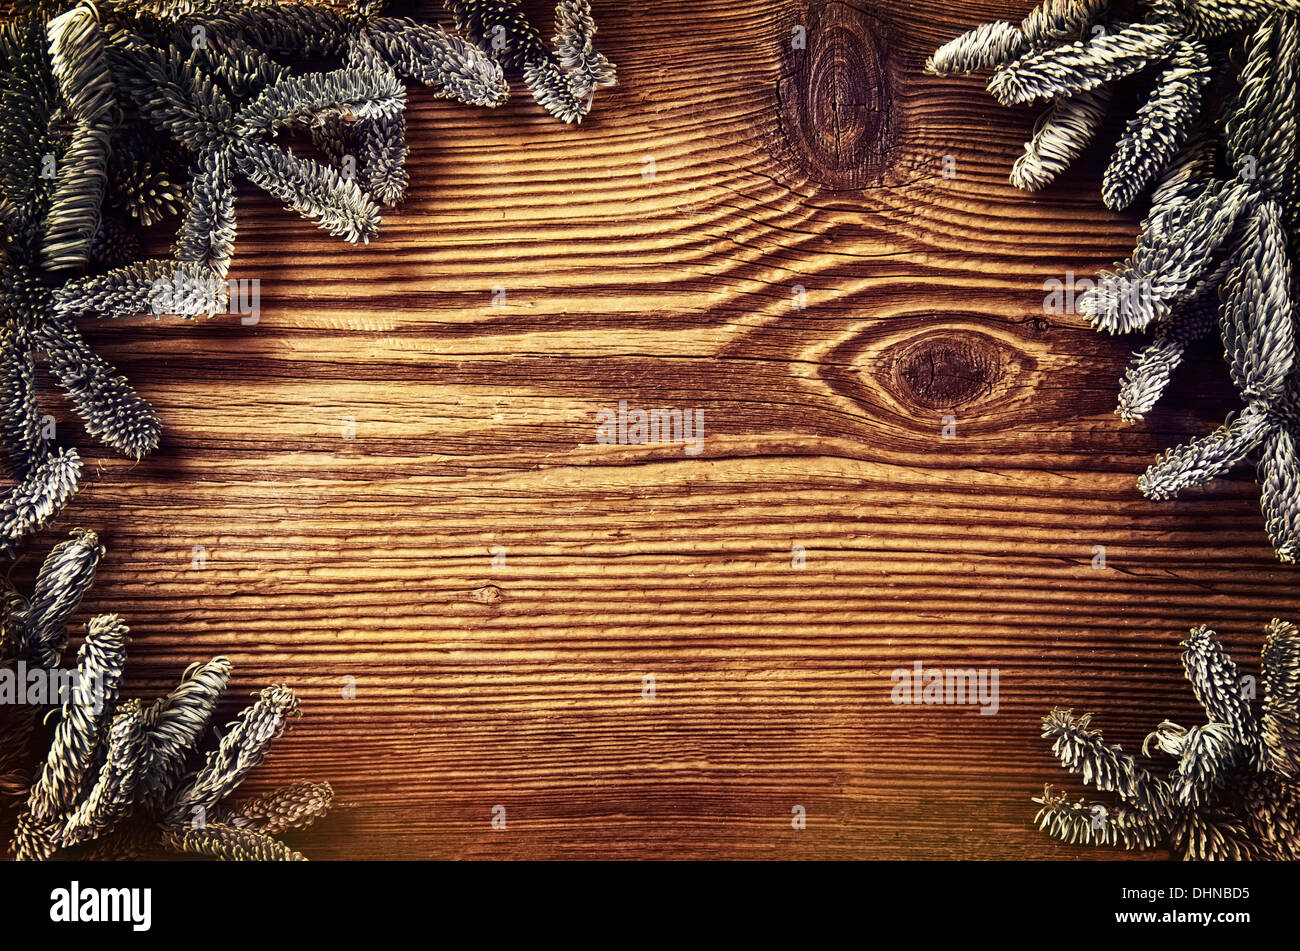 wooden board with sprunce branches Stock Photo